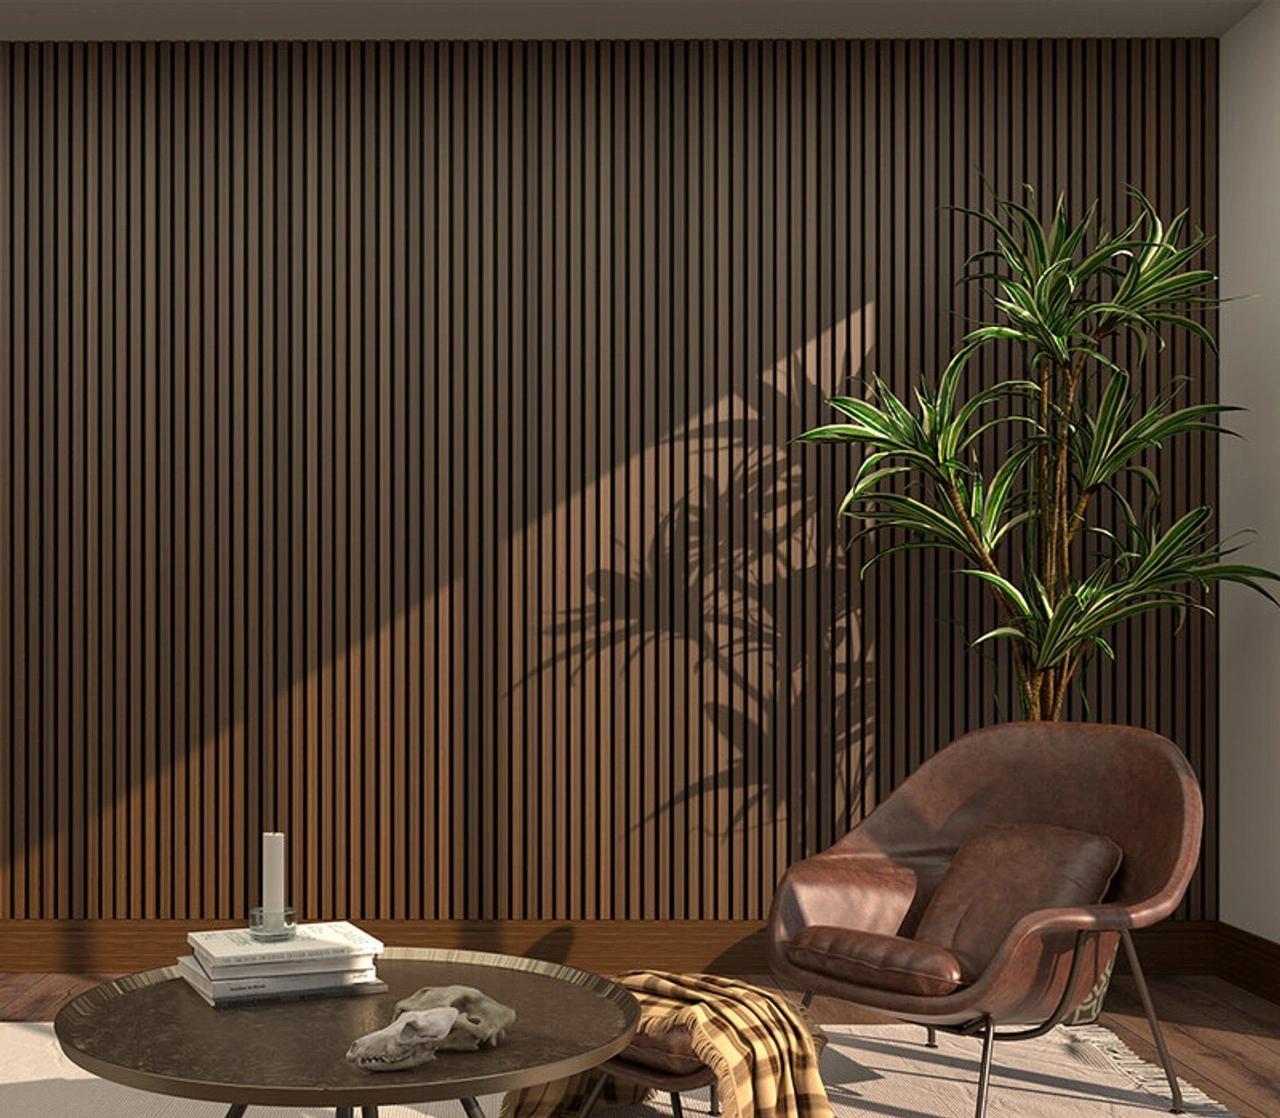 Deanta dark brown slatted timber wall panelling supplied by Howarth Timber.